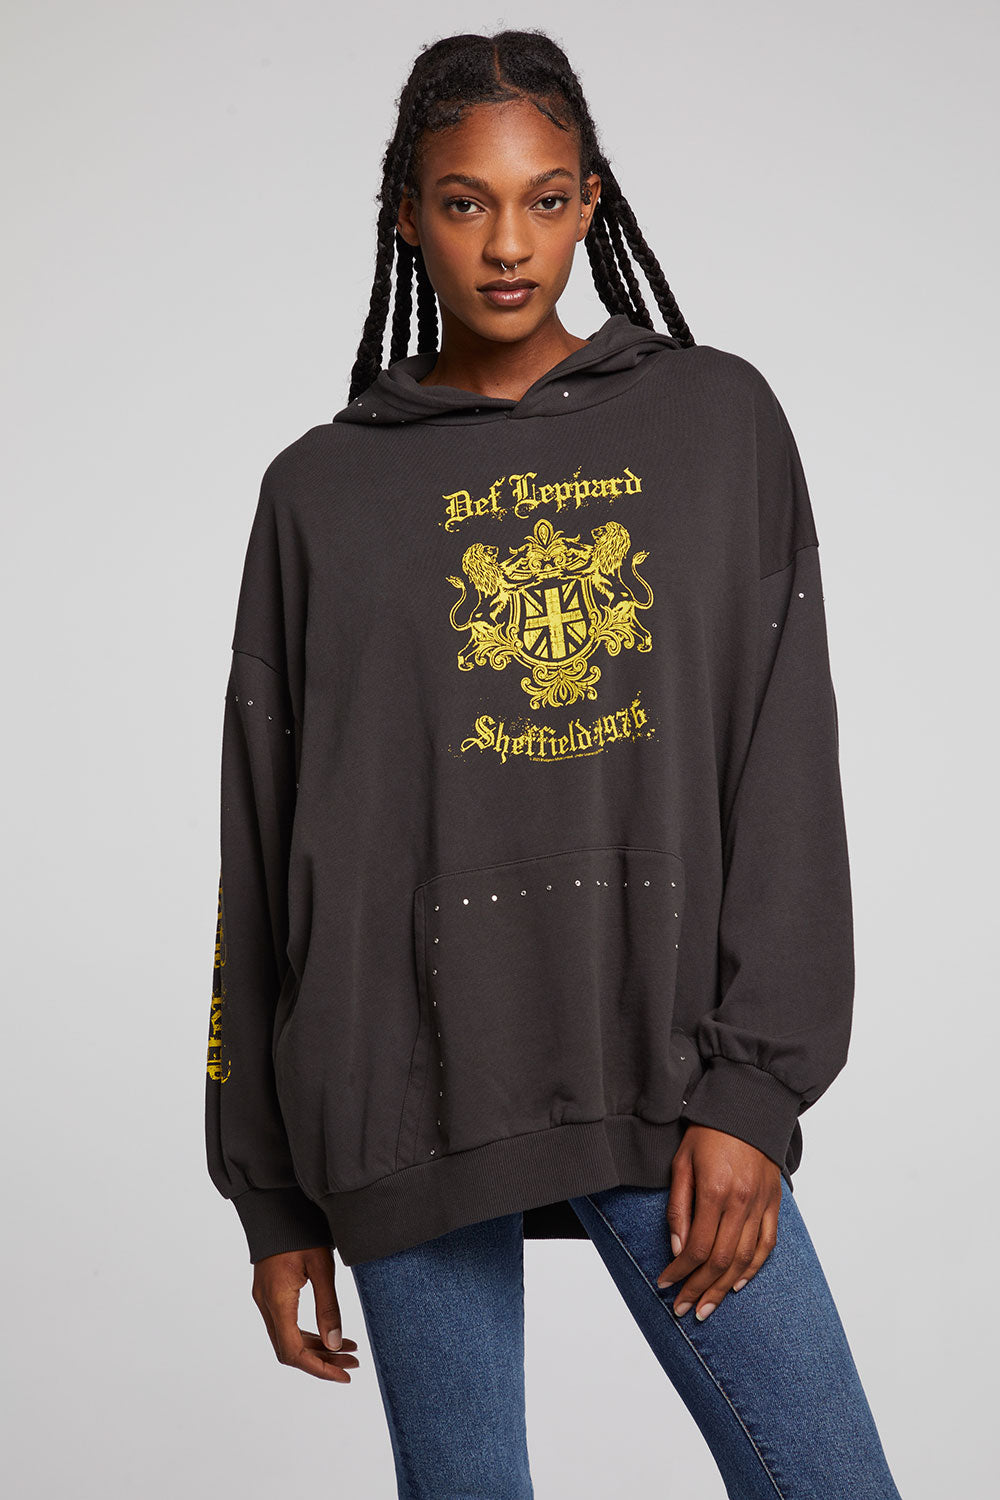 Def Leppard Crest WOMENS chaserbrand